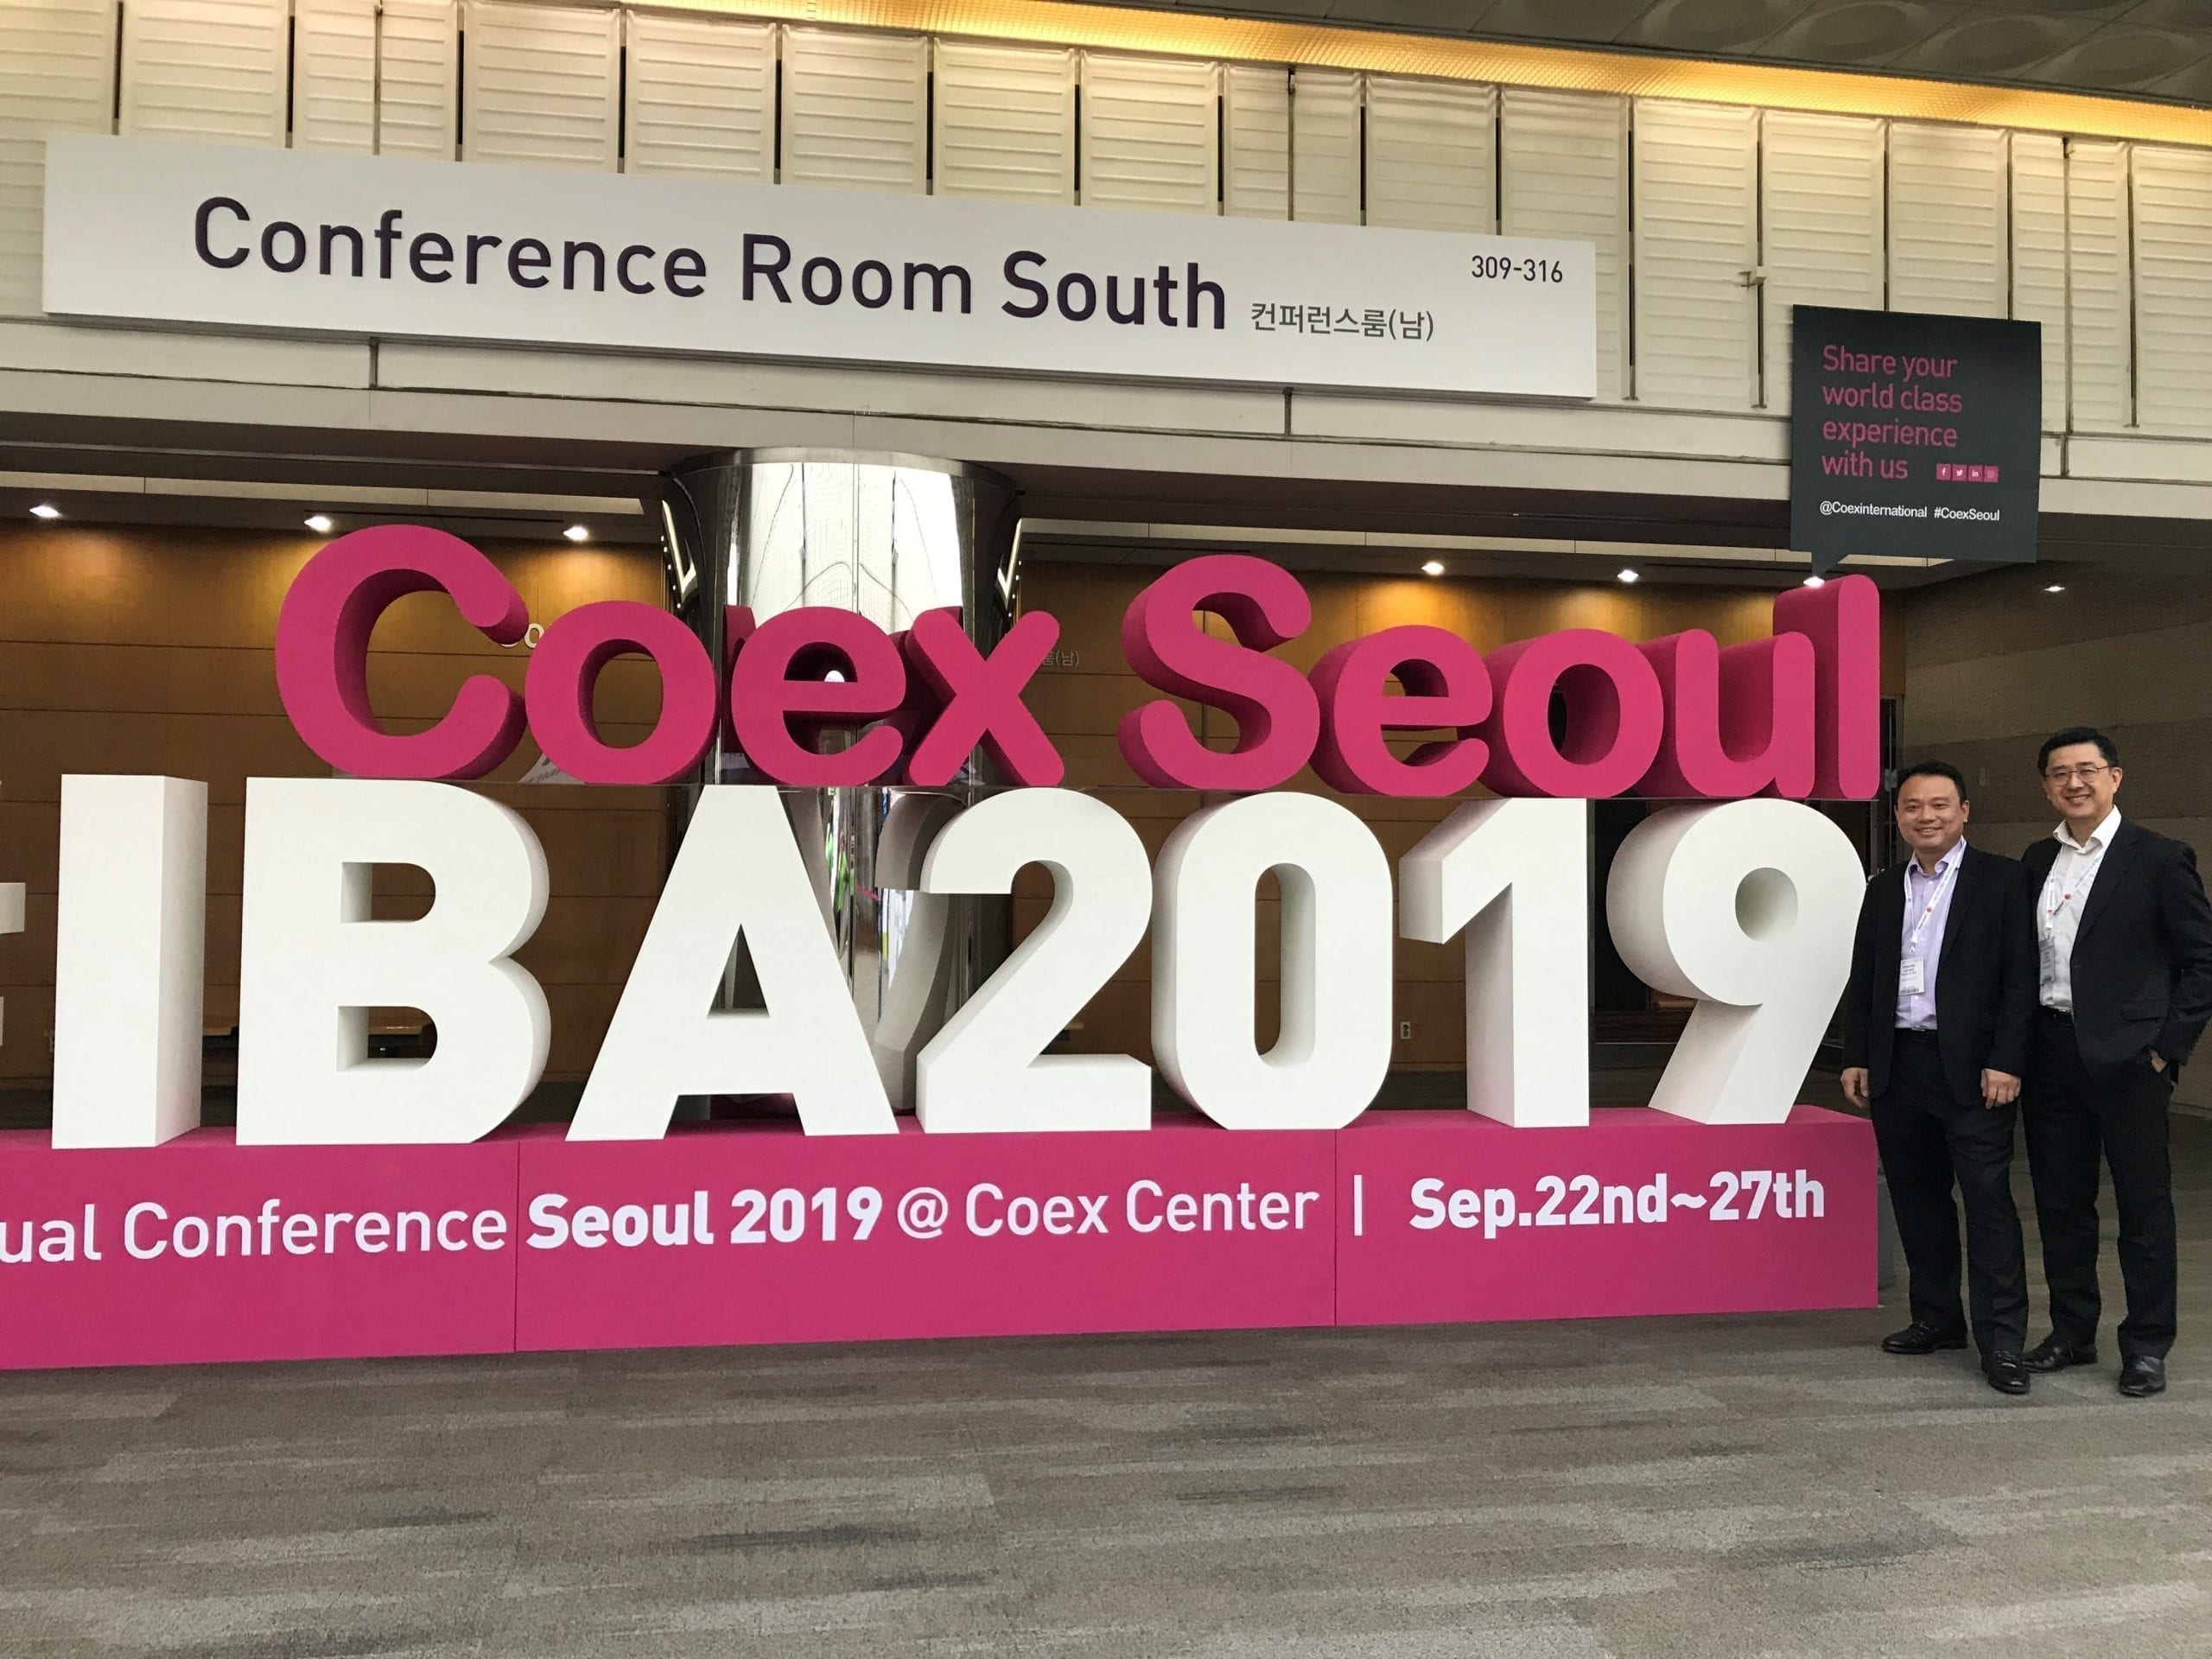 From Left to Right: Edmond Leung and Eddie Look at the IBA conference in Seoul